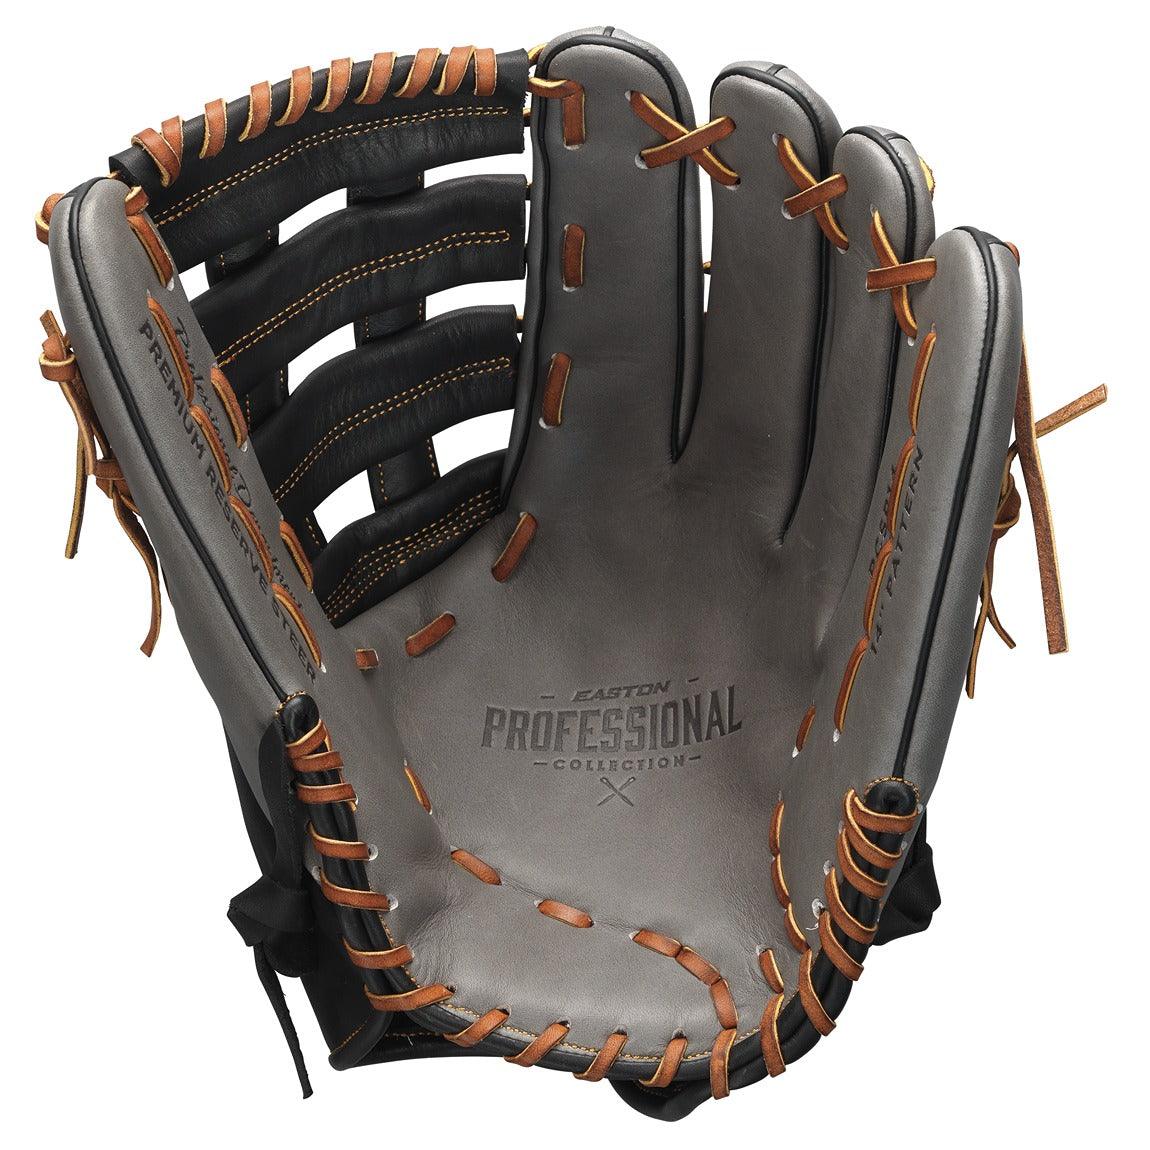 Pro Collection 14" Slow Pitch Glove - Sports Excellence